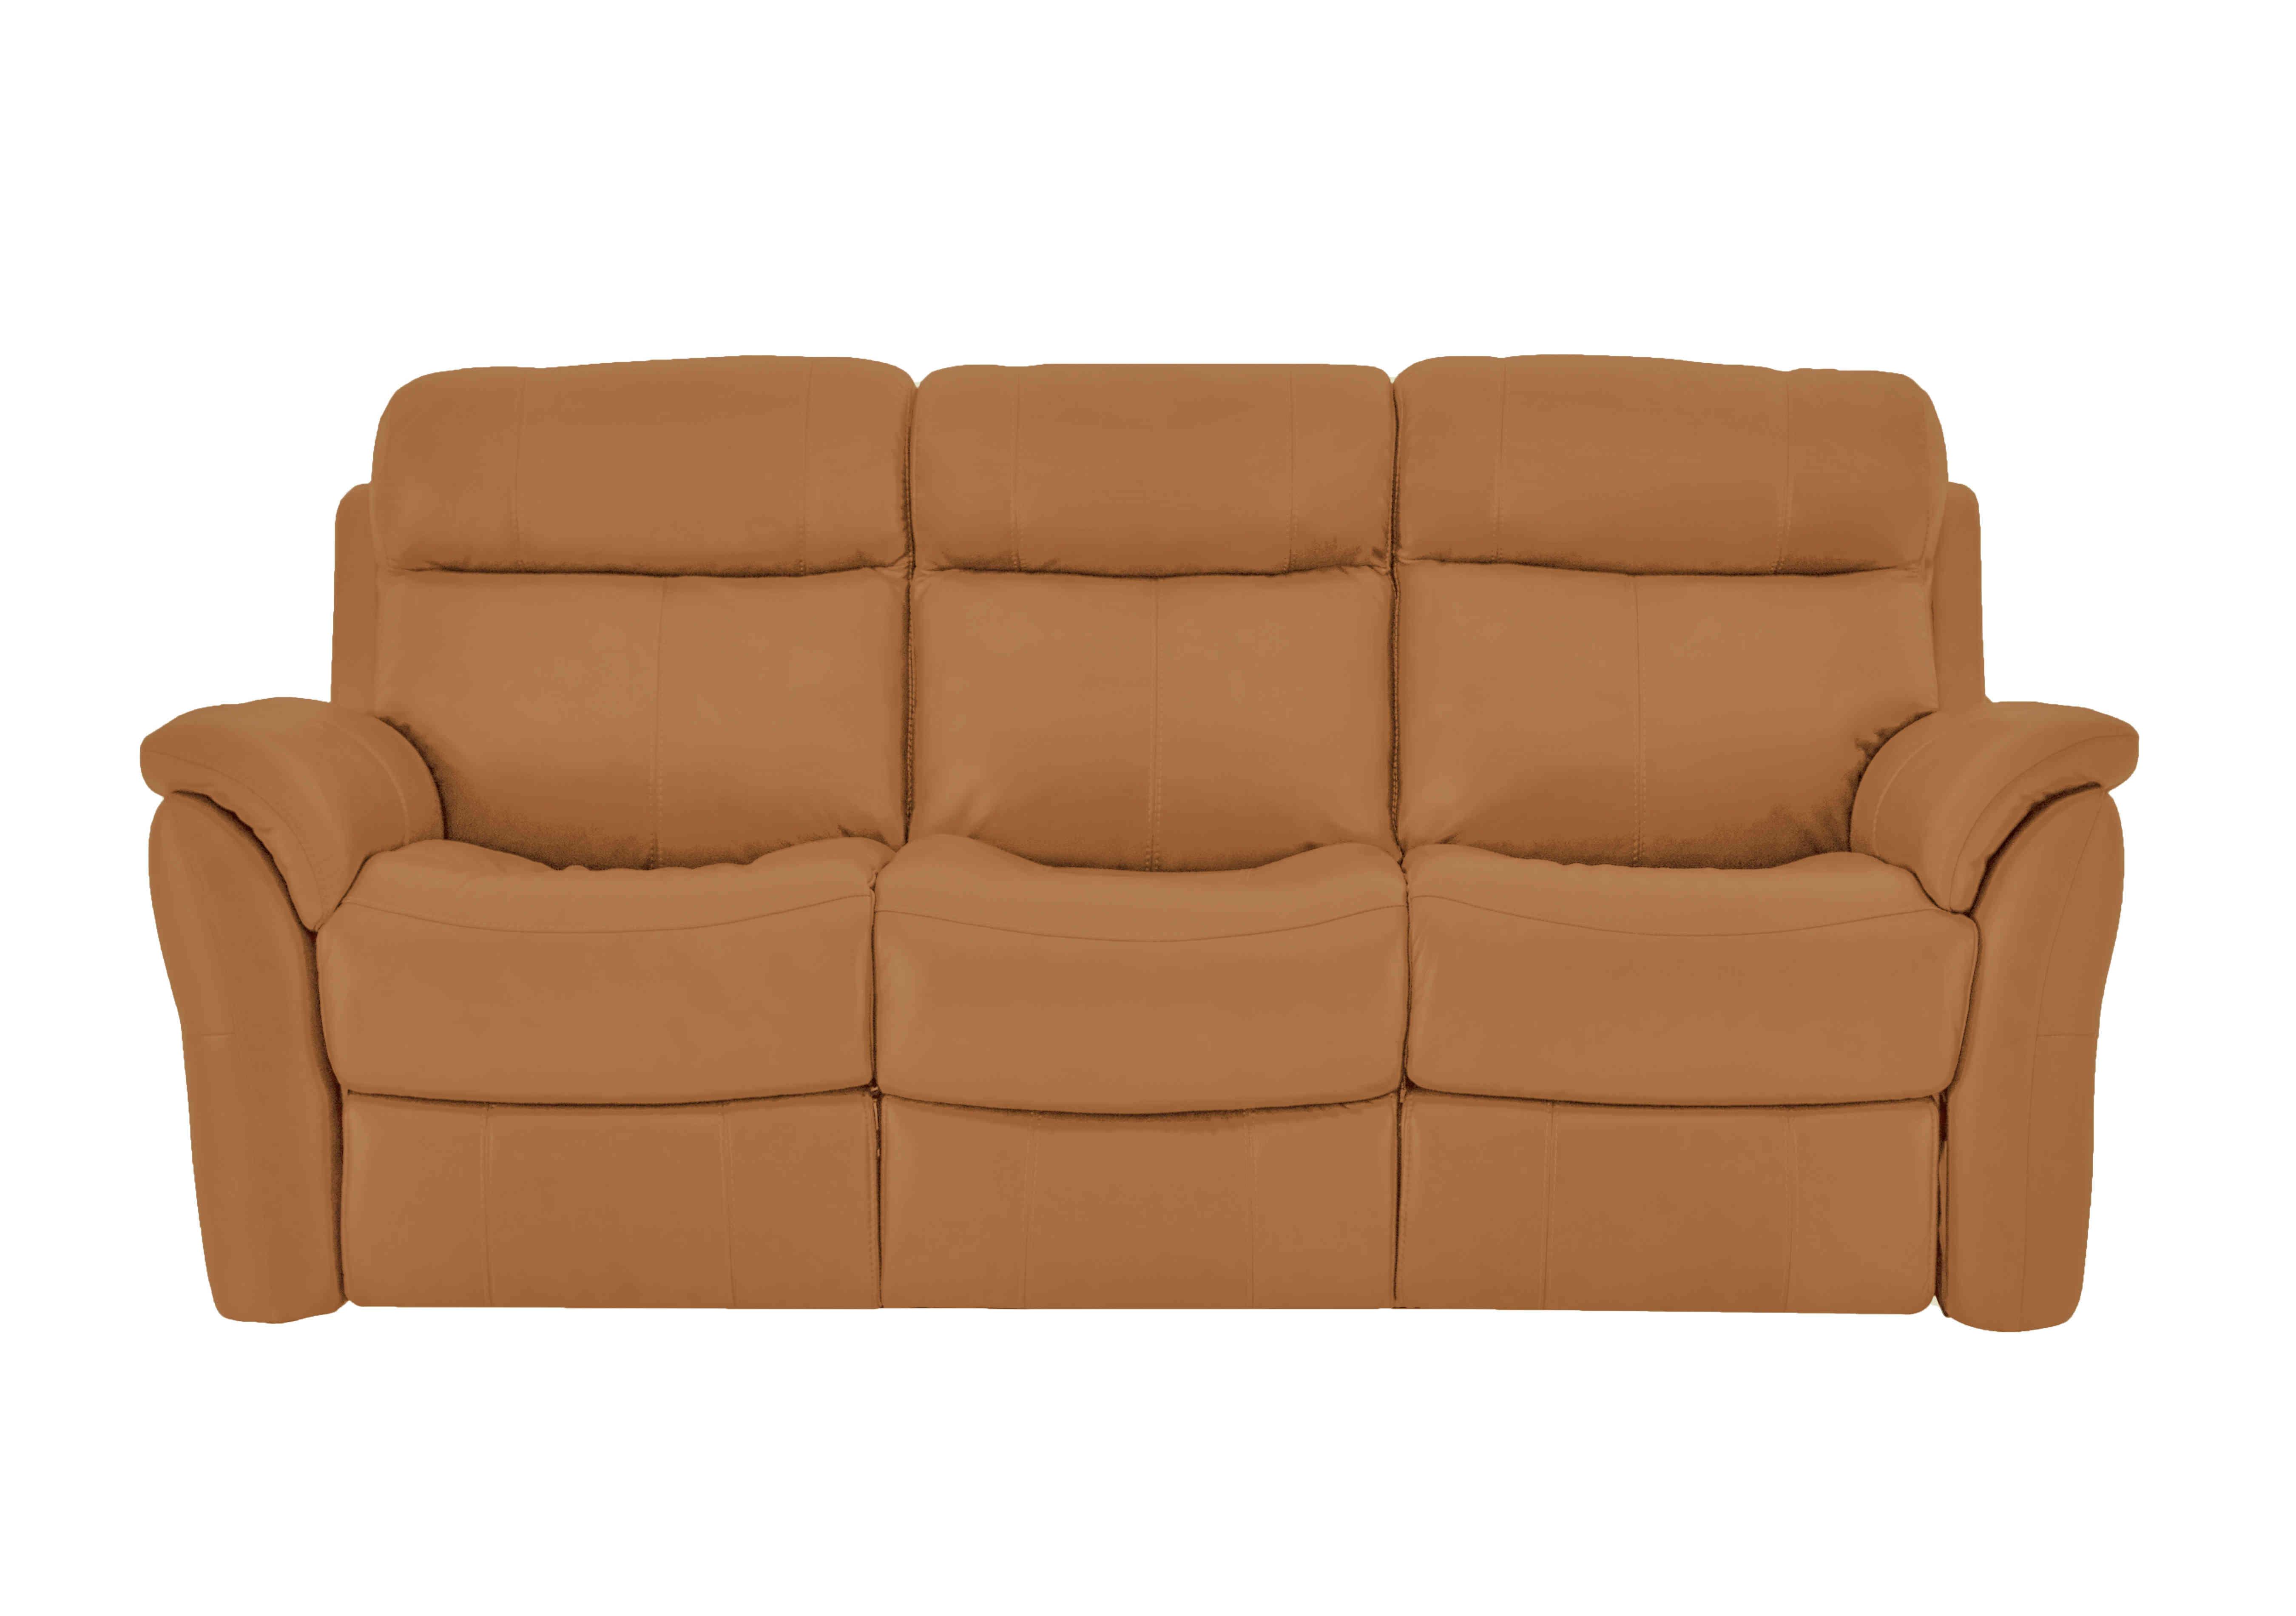 Relax Station Revive 3 Seater Leather Sofa in Bv-335e Honey Yellow on Furniture Village